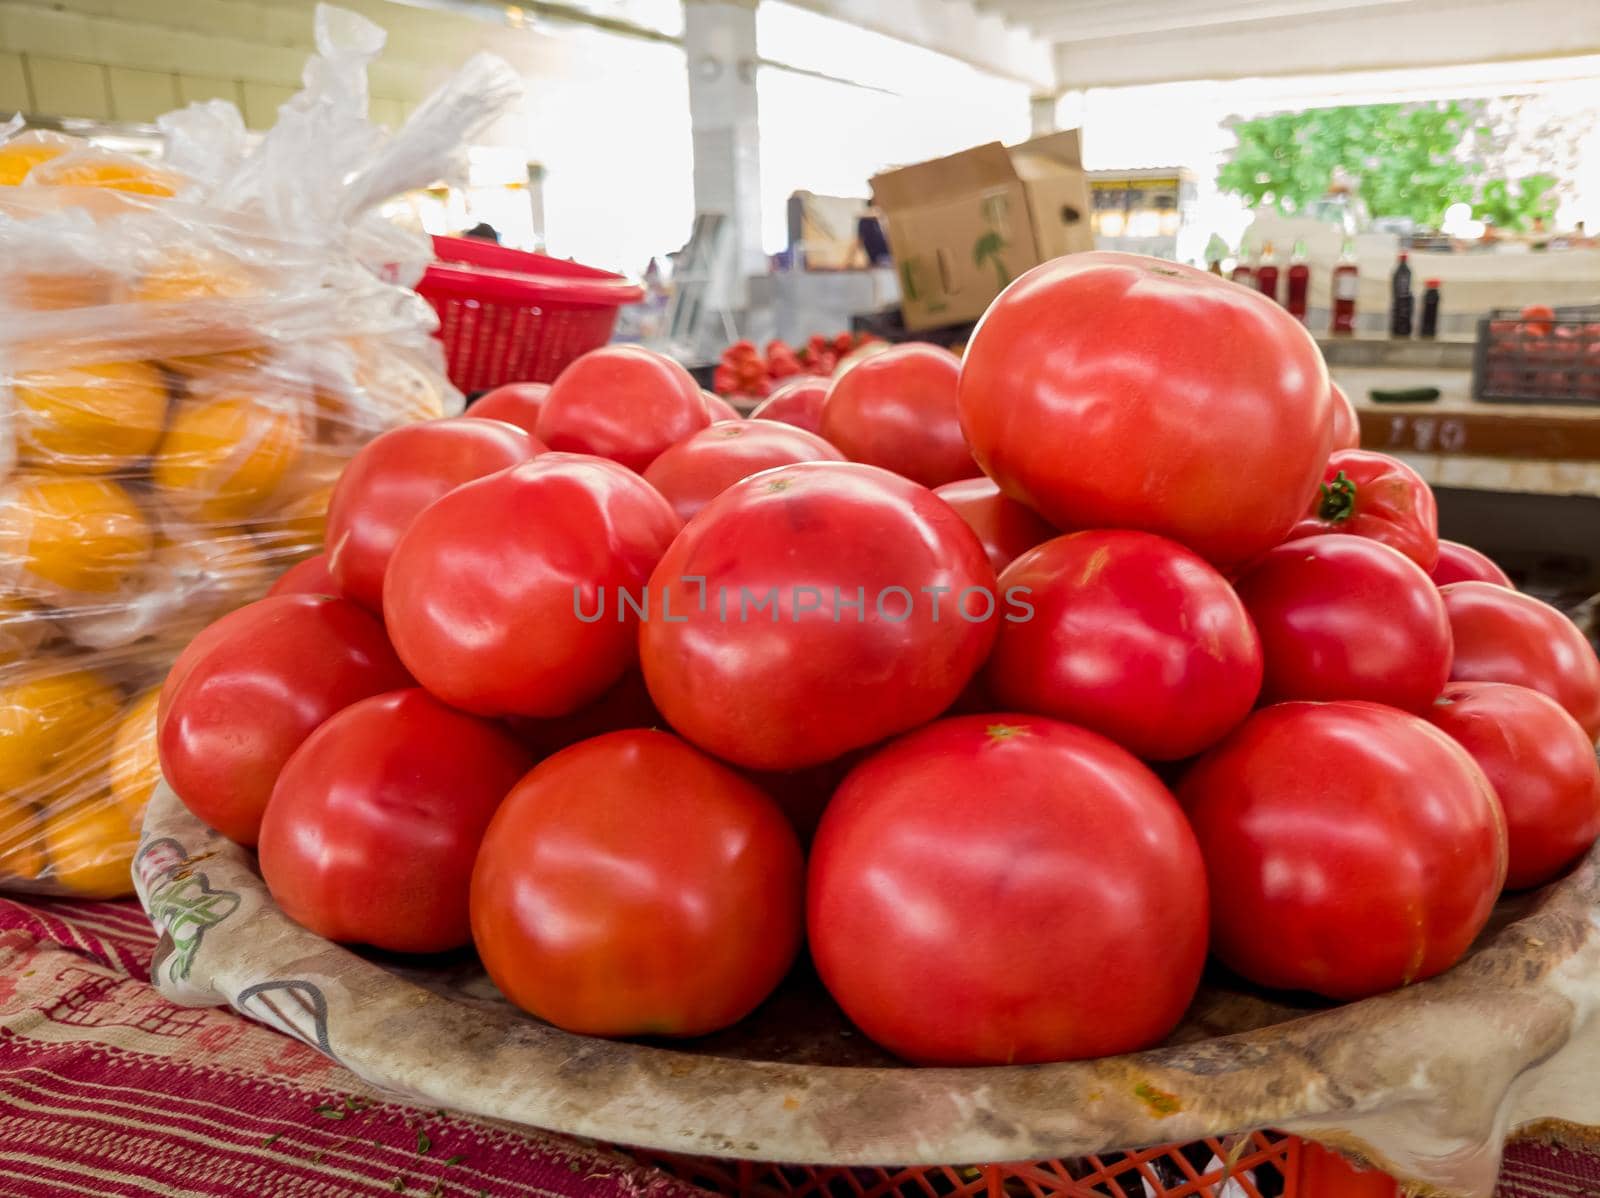 Street market with vegetables and fruits. Shopping for a bazaar. Counter with tomatoes